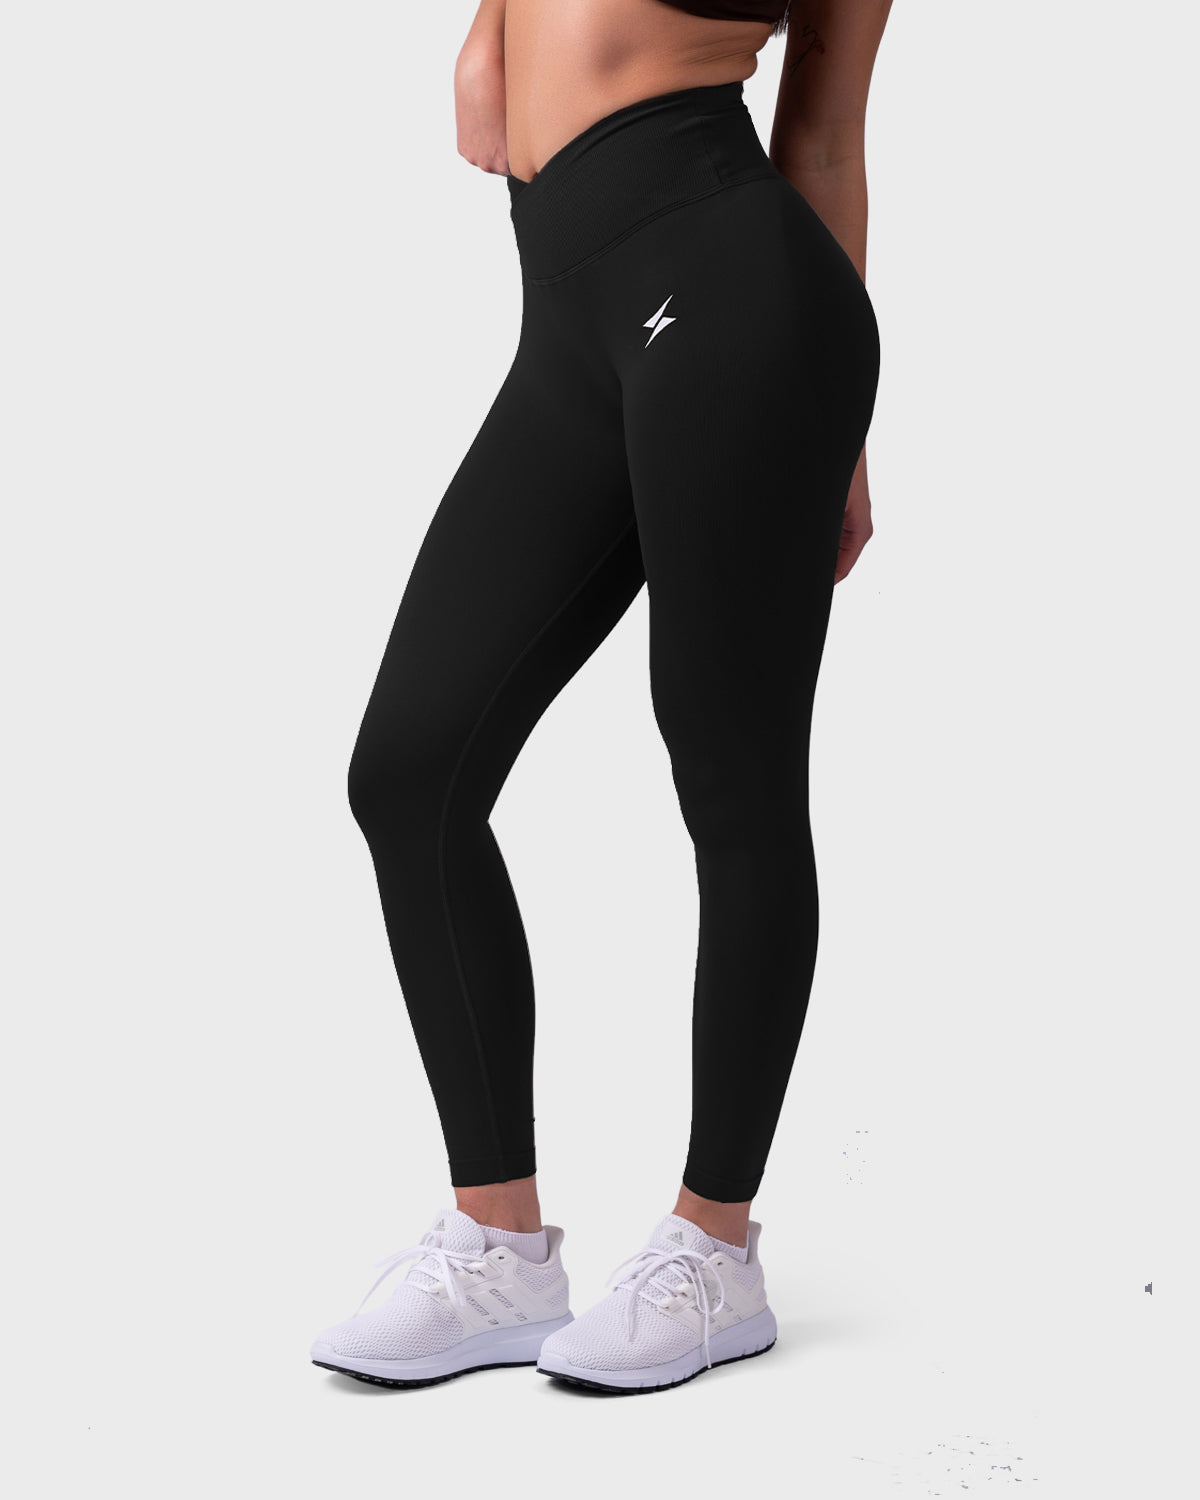 Gym Leggings for Women ZIP IT! Black-Pink E-store  - Polish  manufacturer of sportswear for fitness, Crossfit, gym, running. Quick  delivery and easy return and exchange